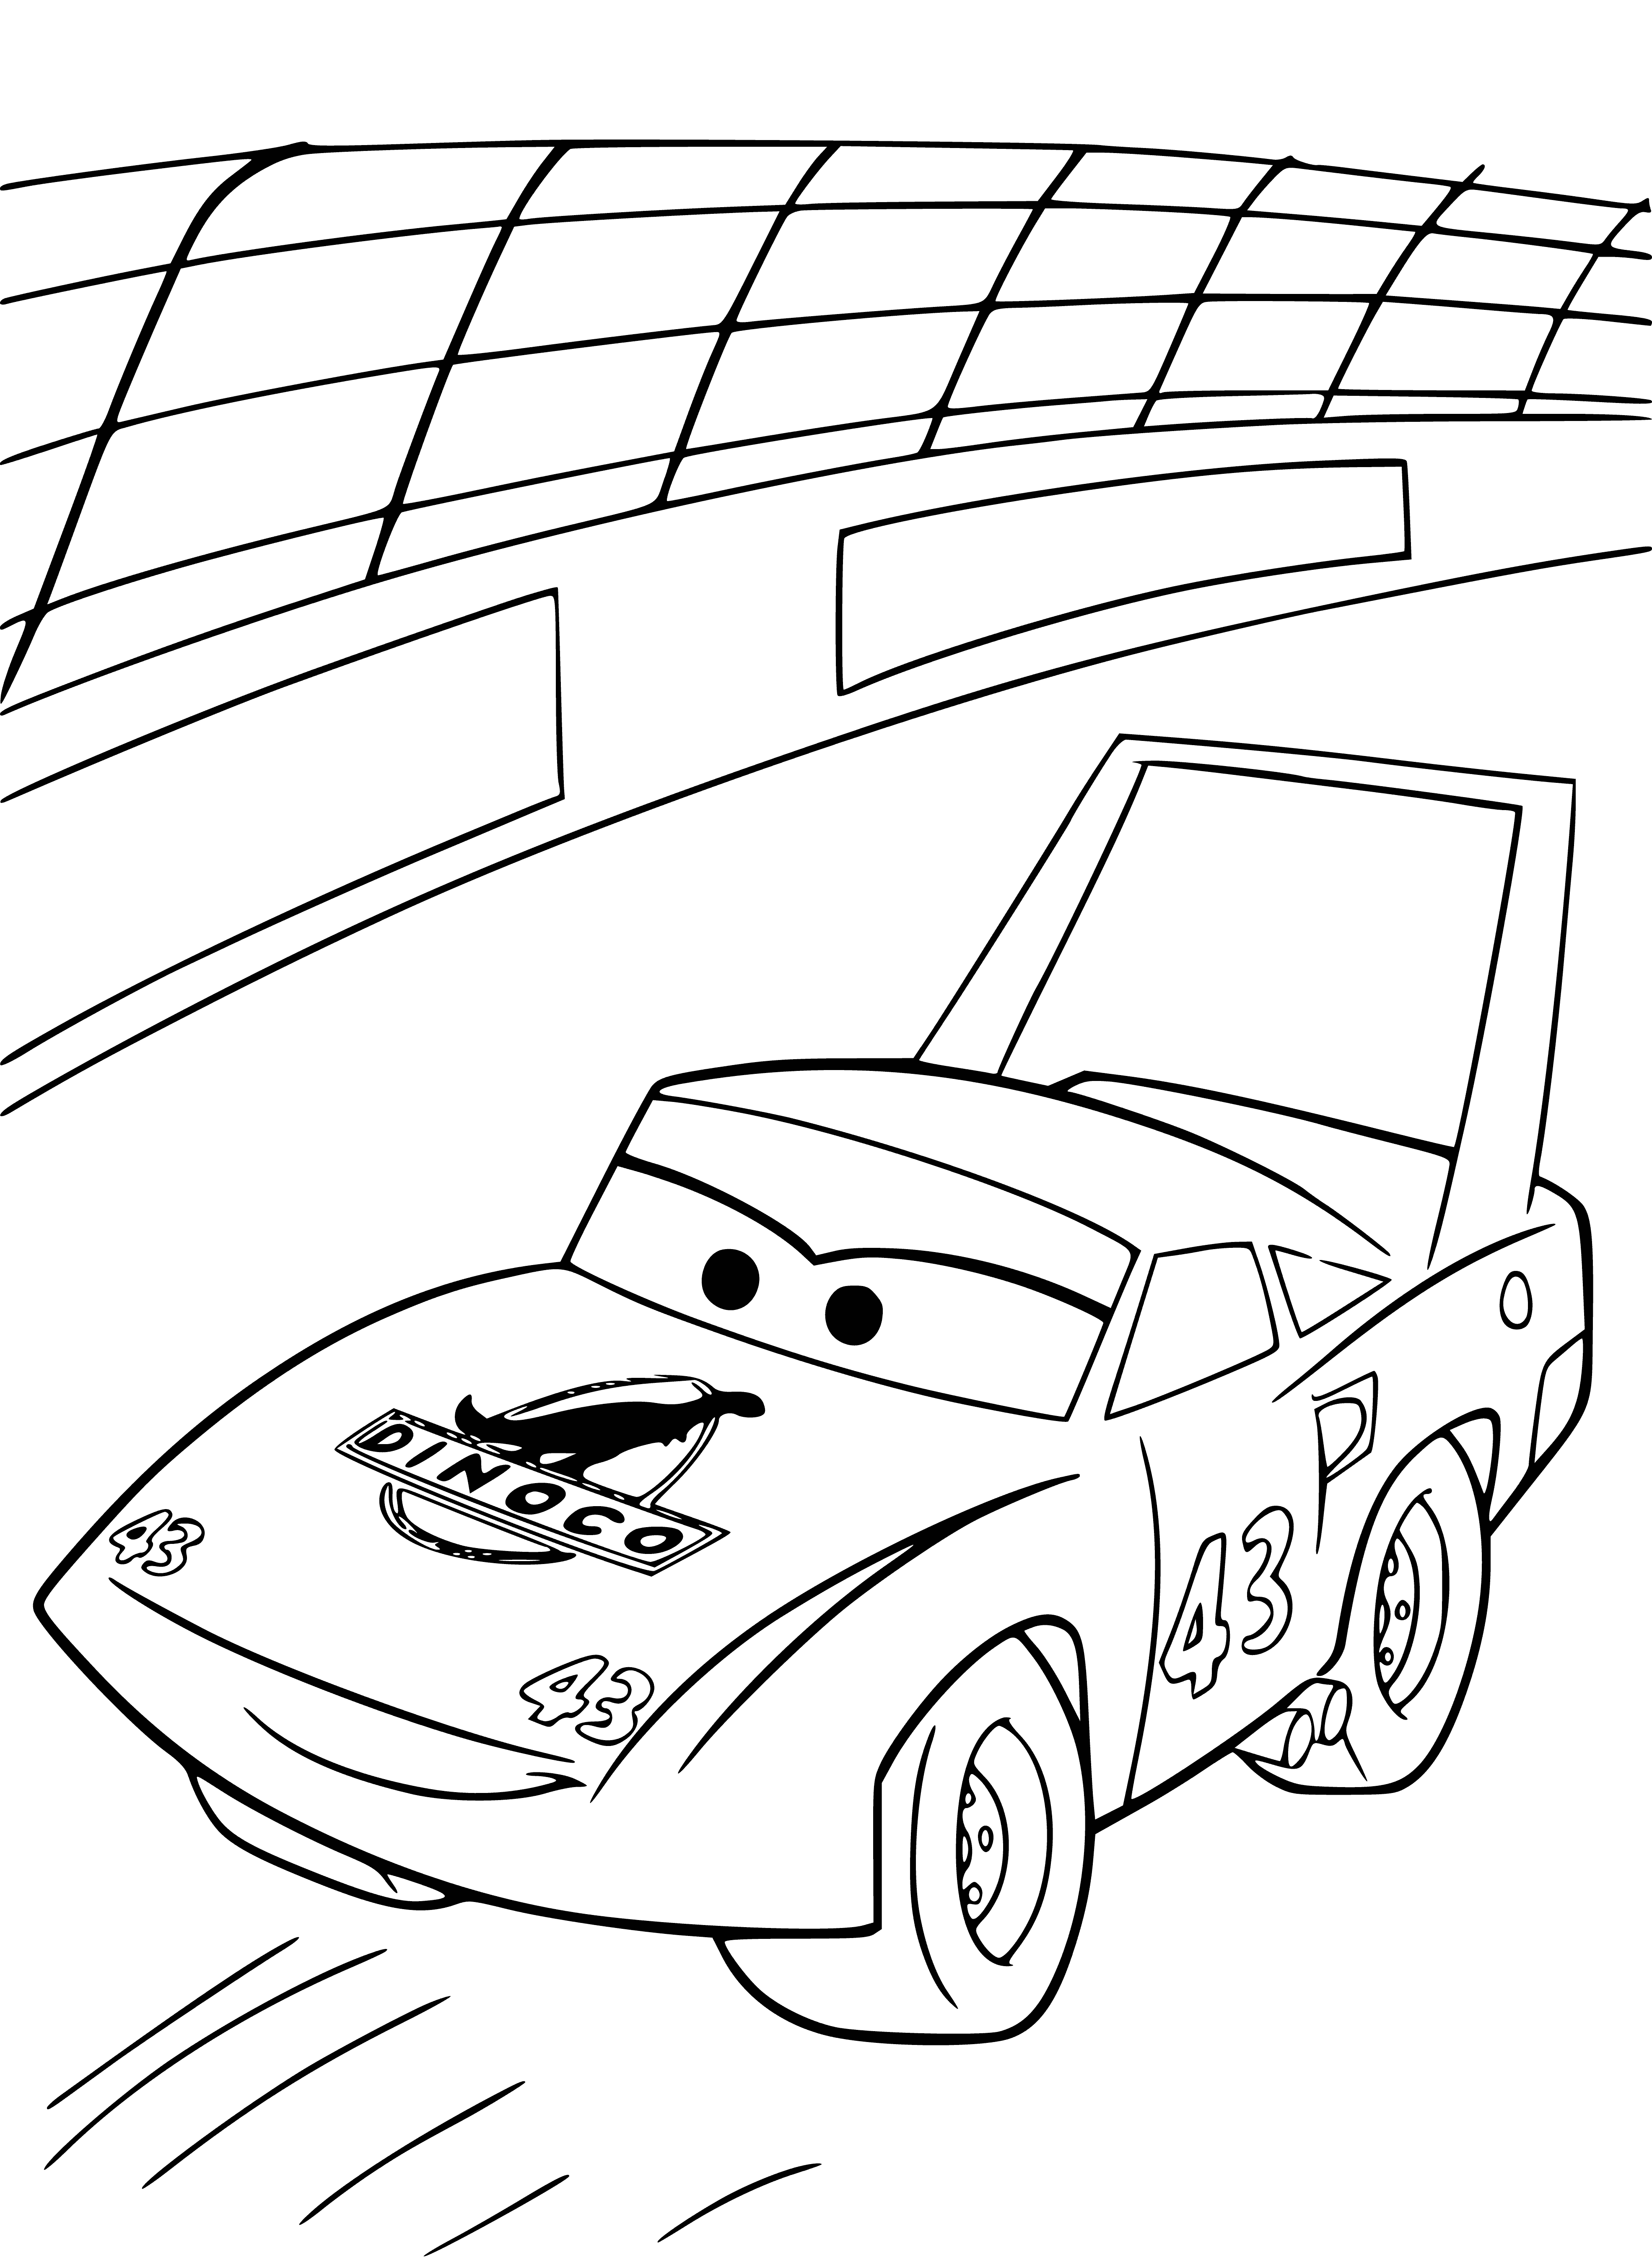 coloring page: Players race cars around a track, first one to go without crashing wins. #racing #blueskygames